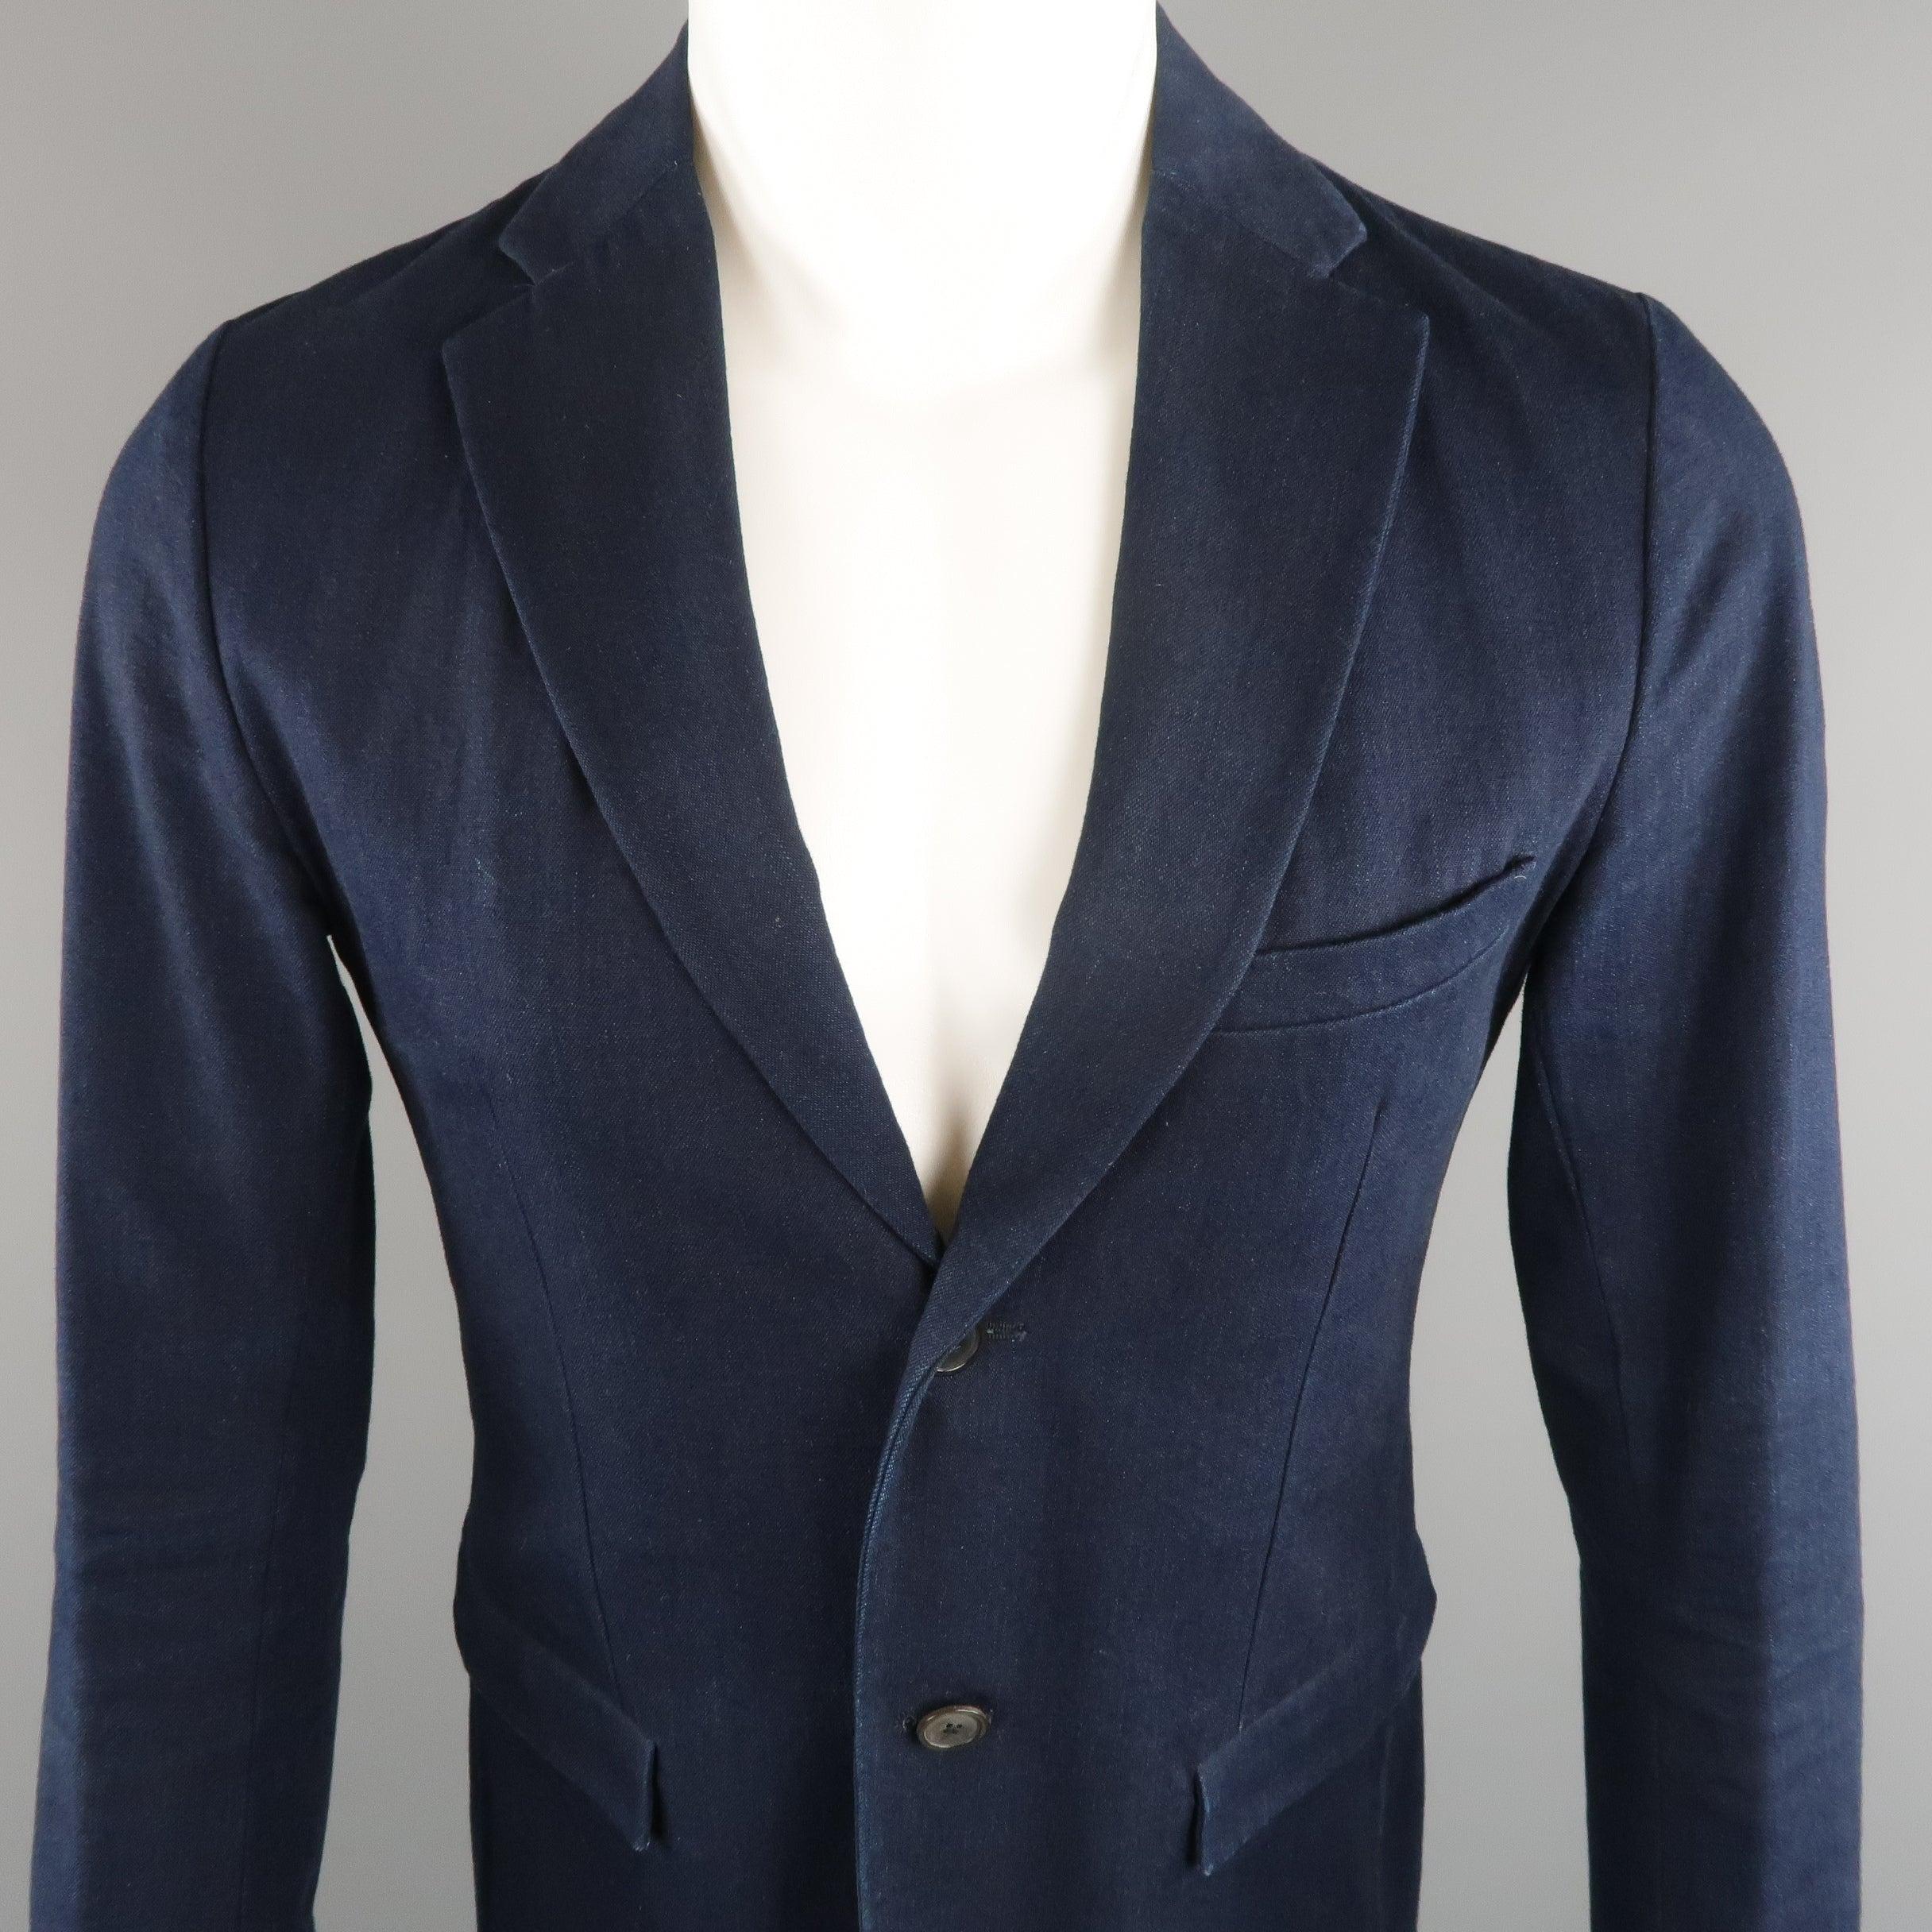 Single breasted JIL SANDER sport coat jacket comes in navy blue solid denim, with notch lapel, two button front, two front flap pockets and single vent on the back. Made in Italy.Good Pre-Owned Condition. Some marks of use on the chest and cuffs.